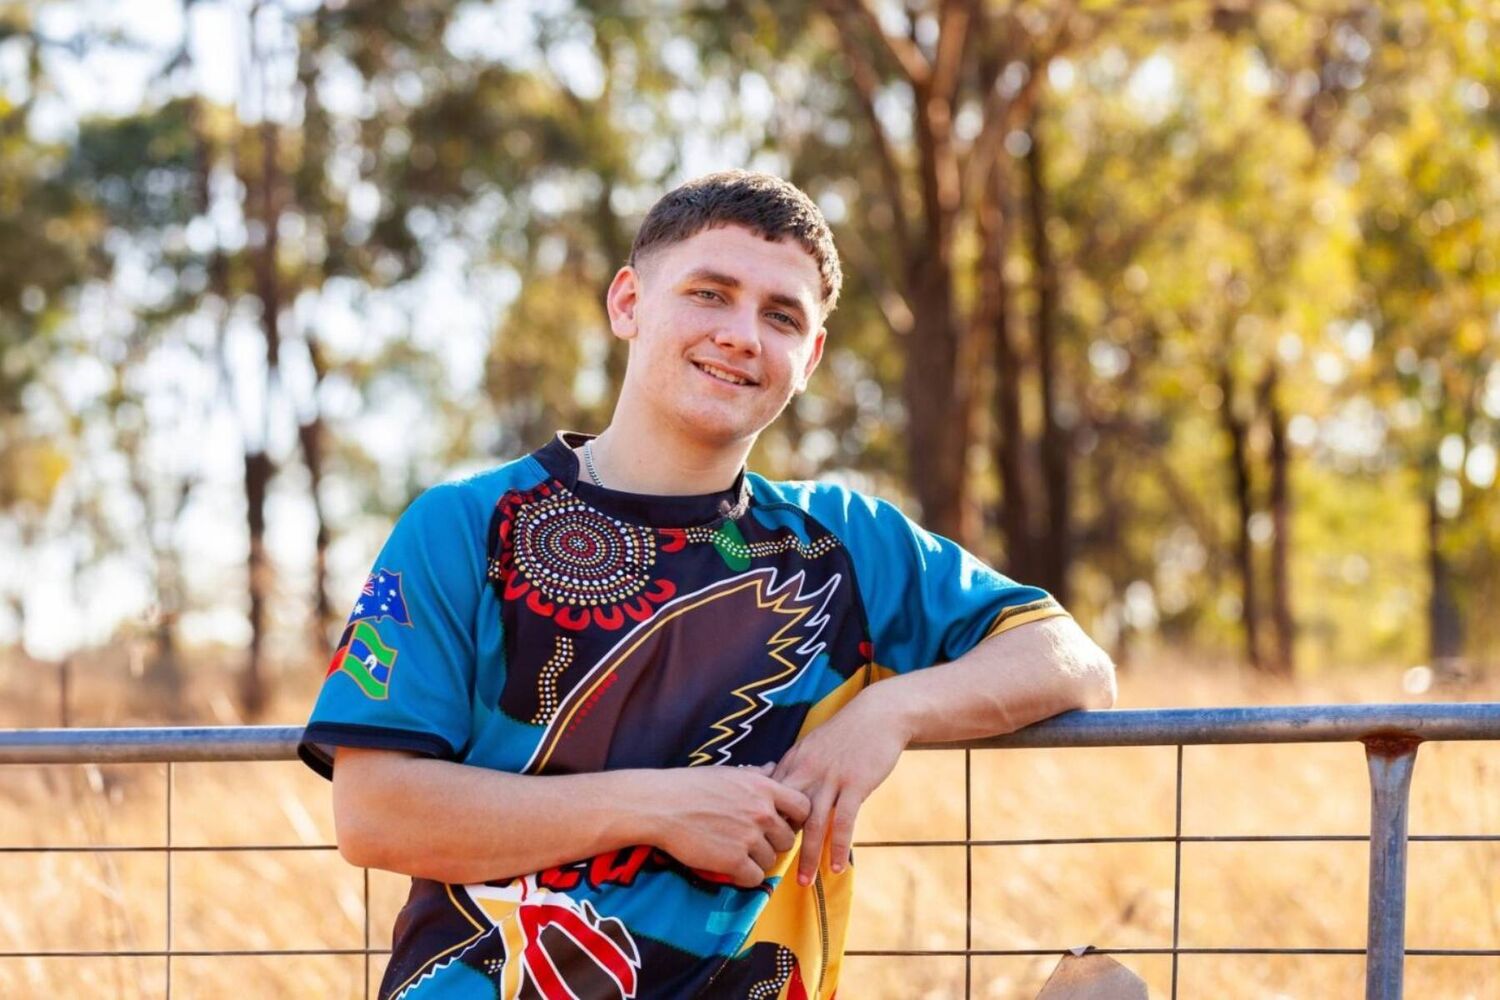 Aboriginal teenagher wearing colourful shirt leaning on fence